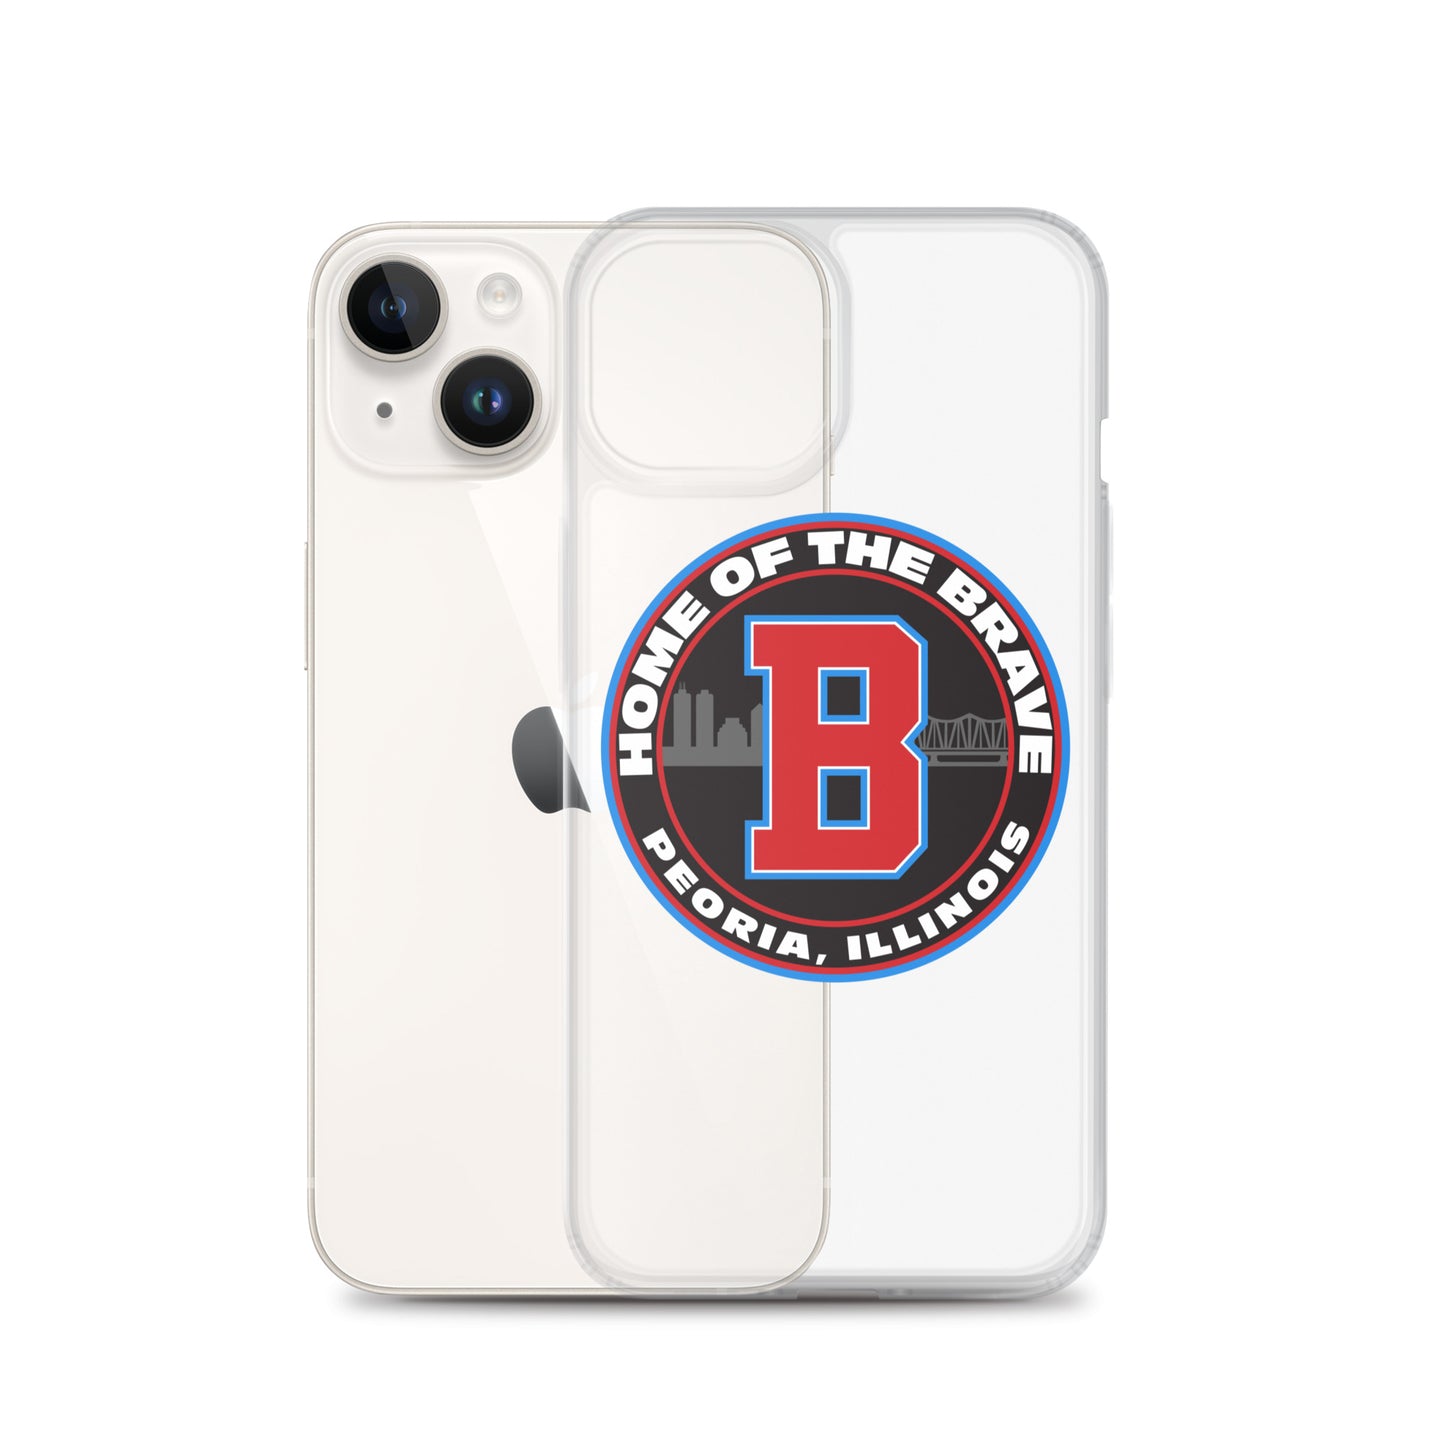 Home of the Brave iPhone Case